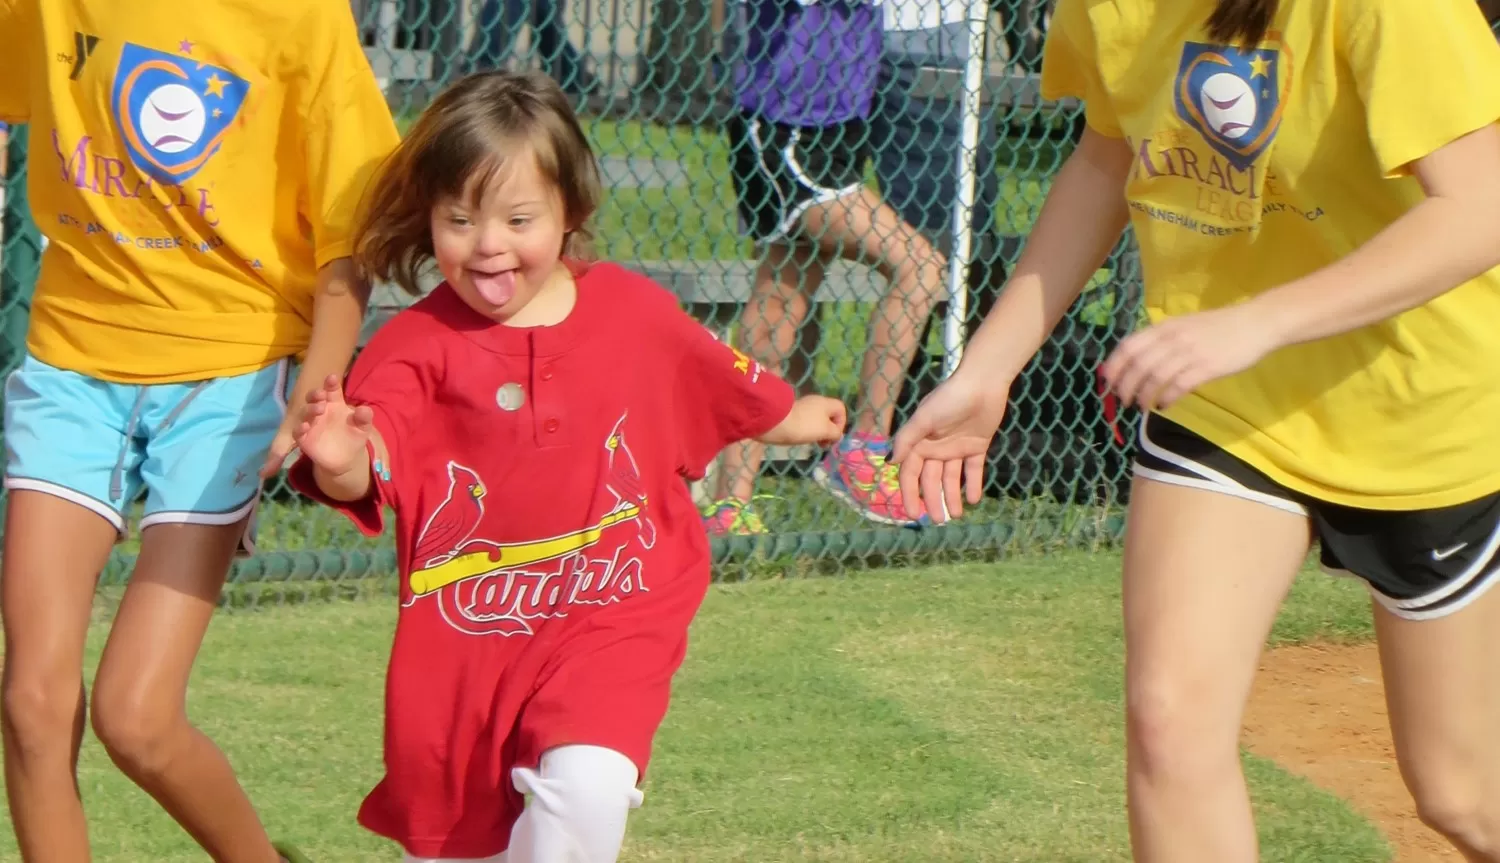 A happy young girl with Down Syndrome in the Miracle League baseball program runs to first base in a St. Louis Cardinals team jersey.